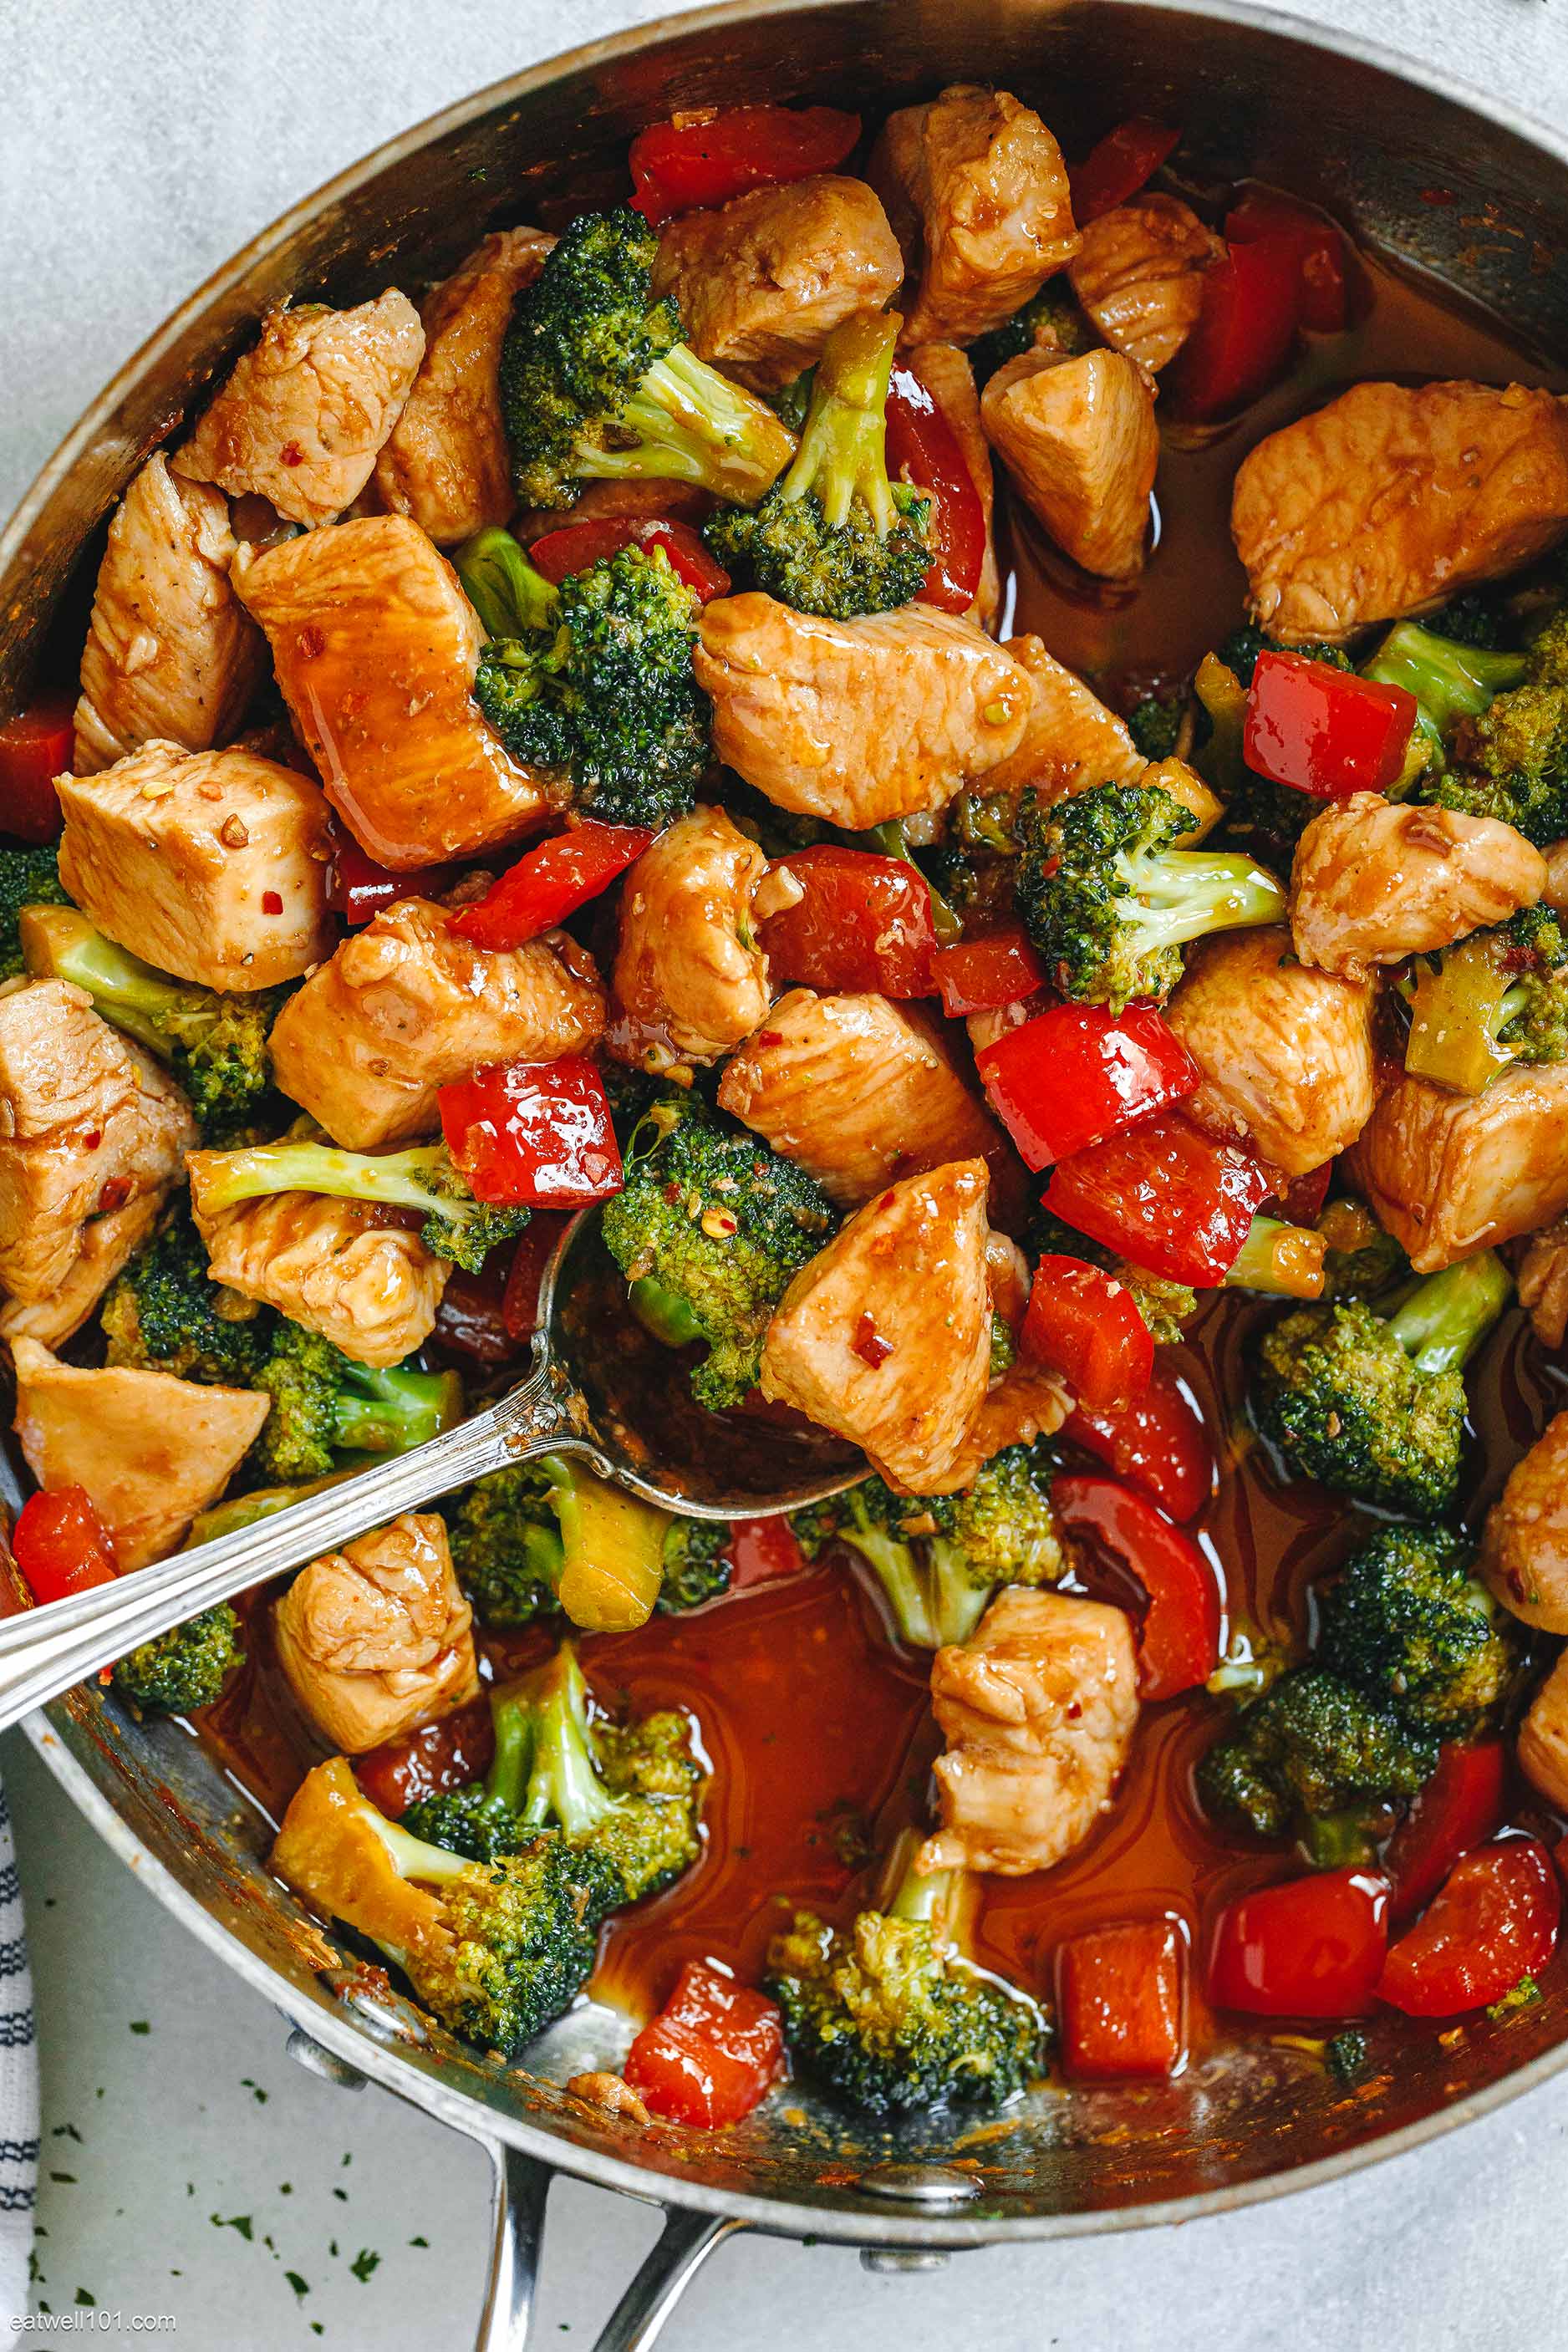 Chicken Stir-Fry Recipe with Broccoli and Bell Pepper – Easy Chicken